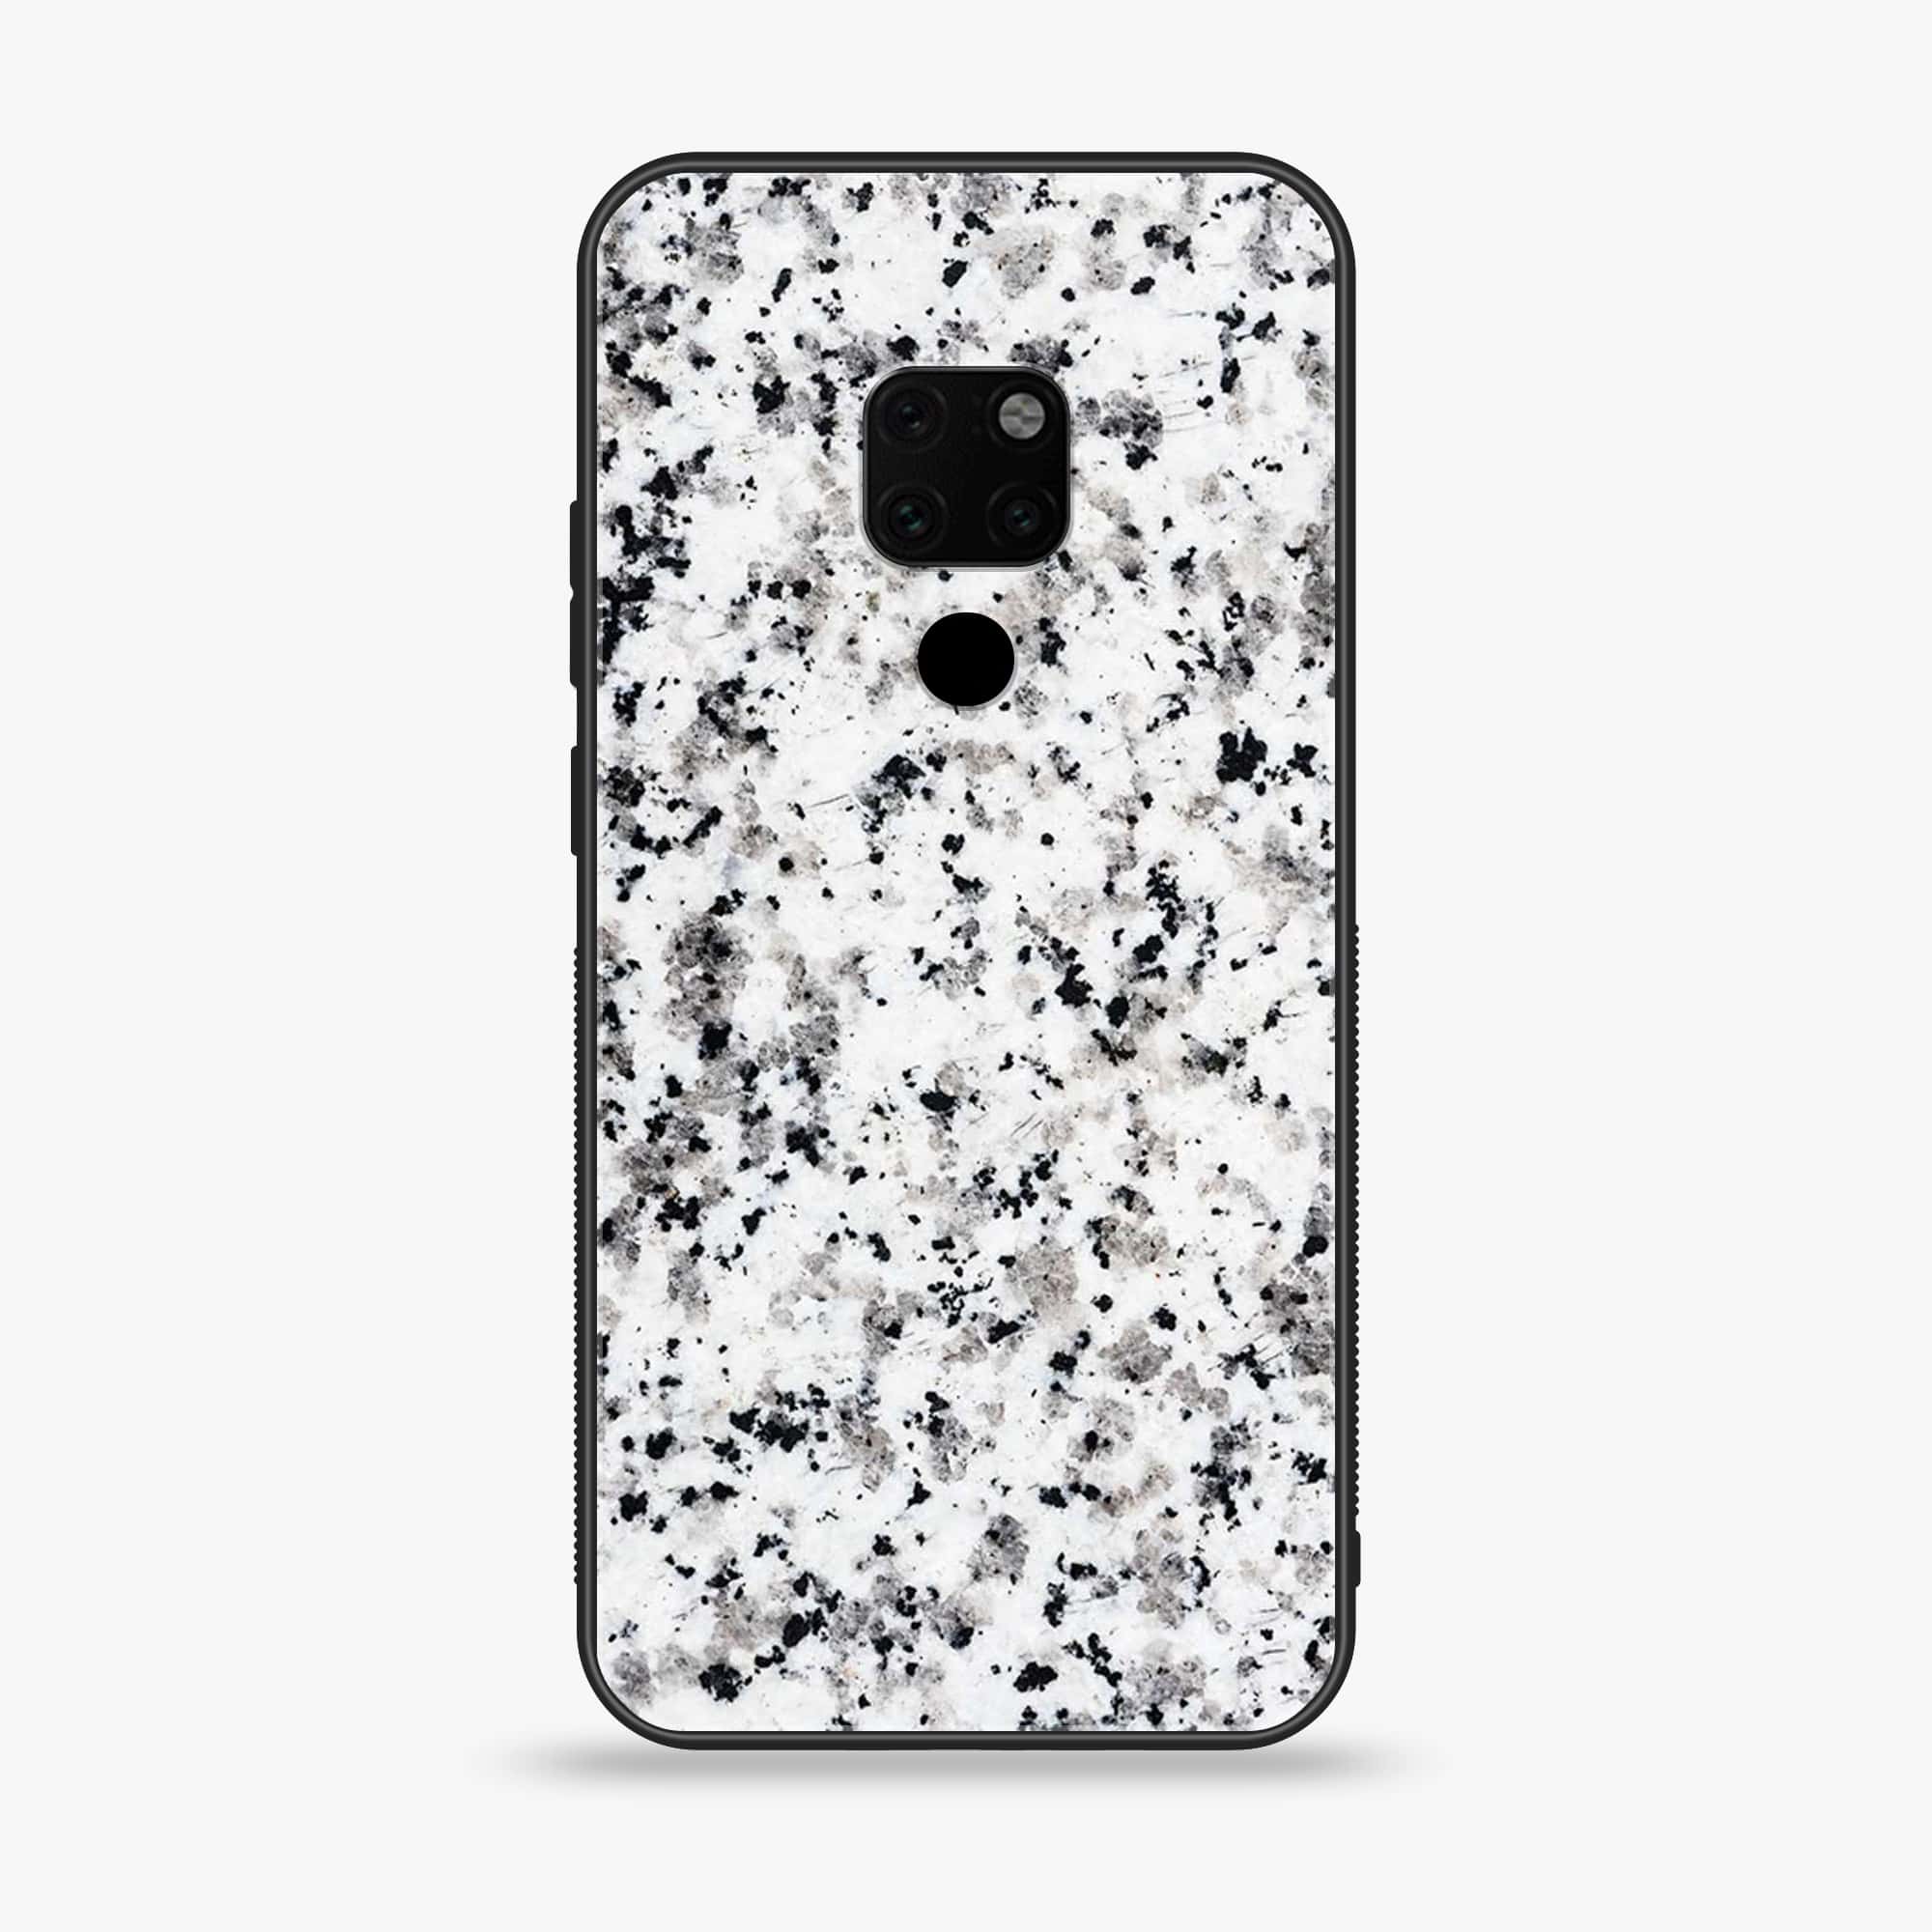 Huawei Mate 20 - White Marble Series - Premium Printed Glass soft Bumper shock Proof Case